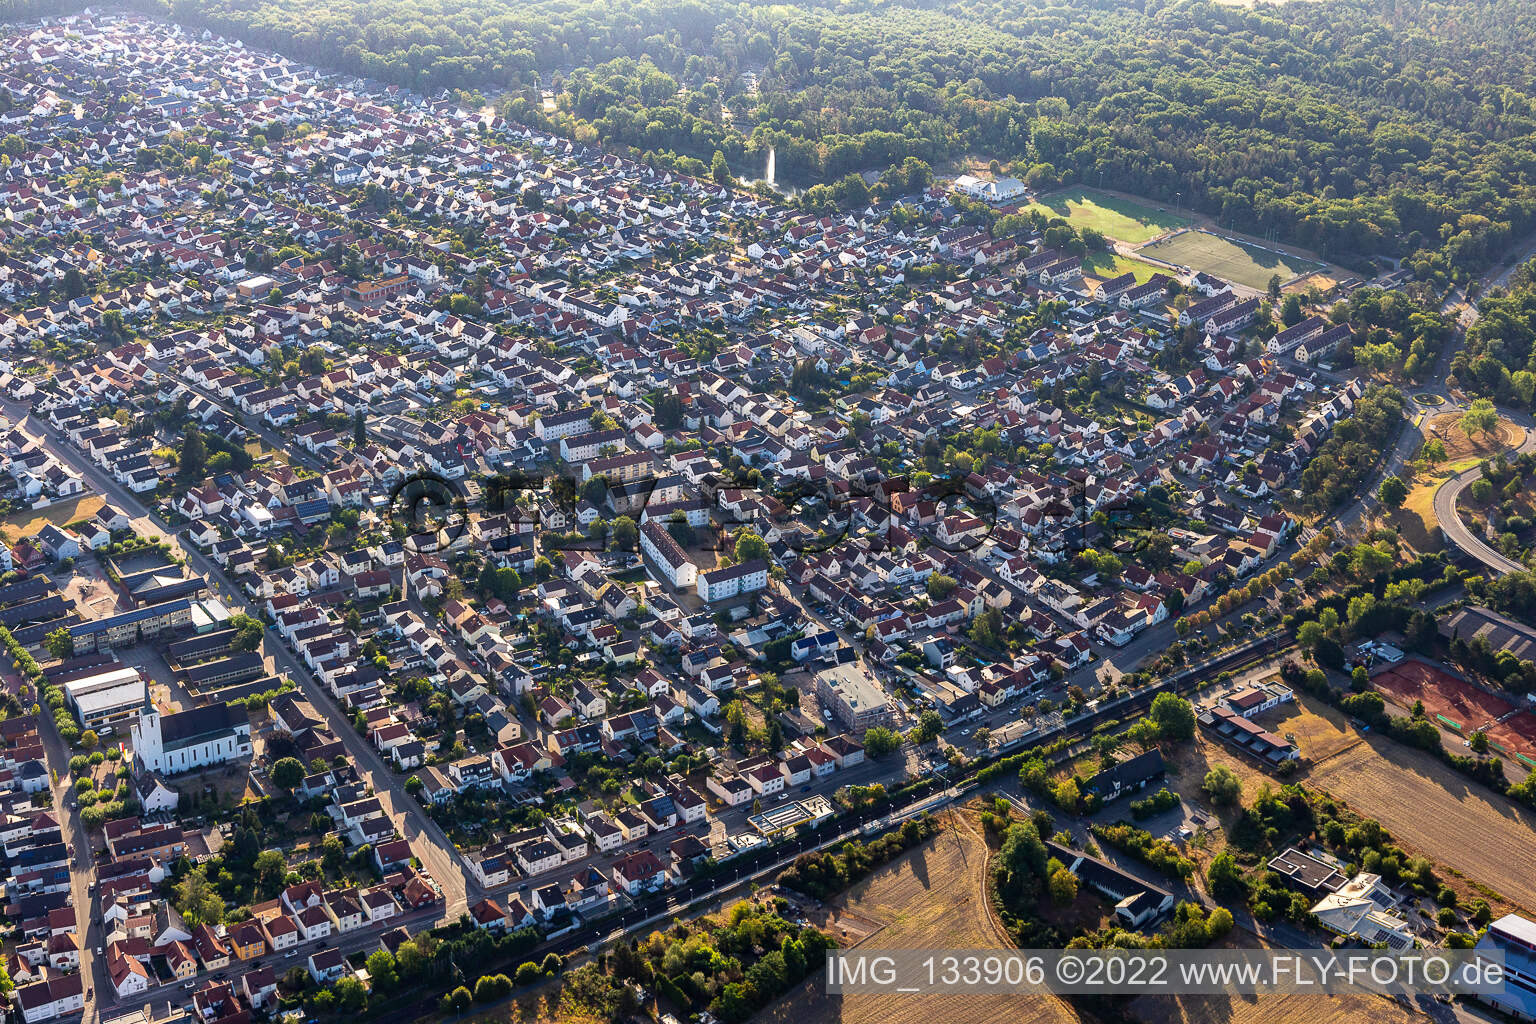 Aerial view of Schifferstadt in the state Rhineland-Palatinate, Germany